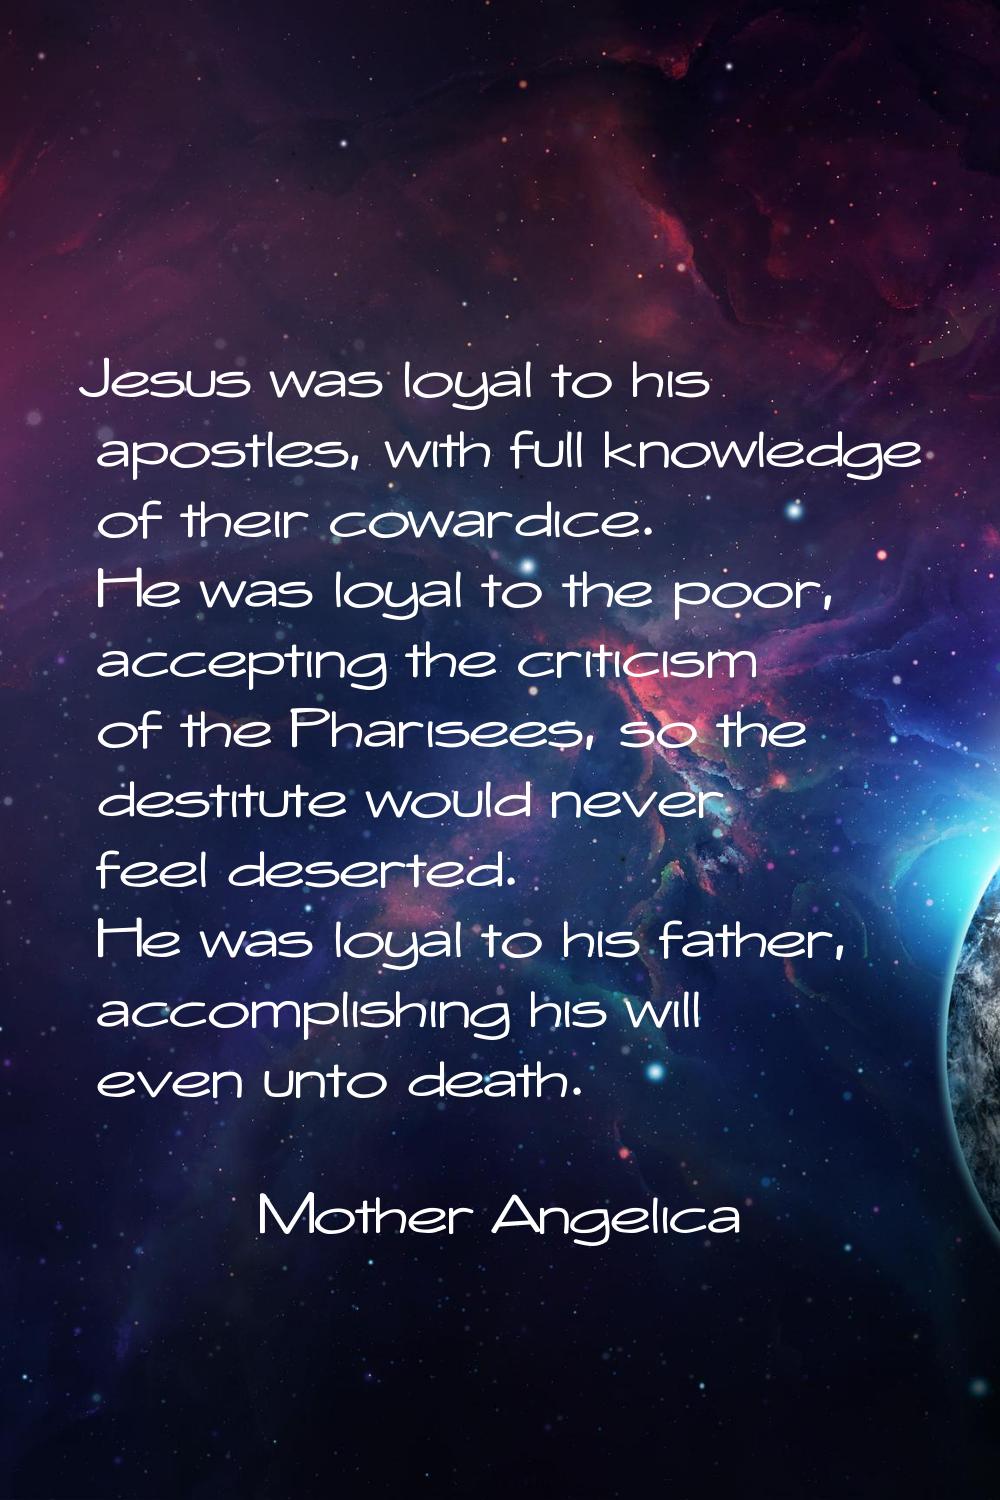 Jesus was loyal to his apostles, with full knowledge of their cowardice. He was loyal to the poor, 